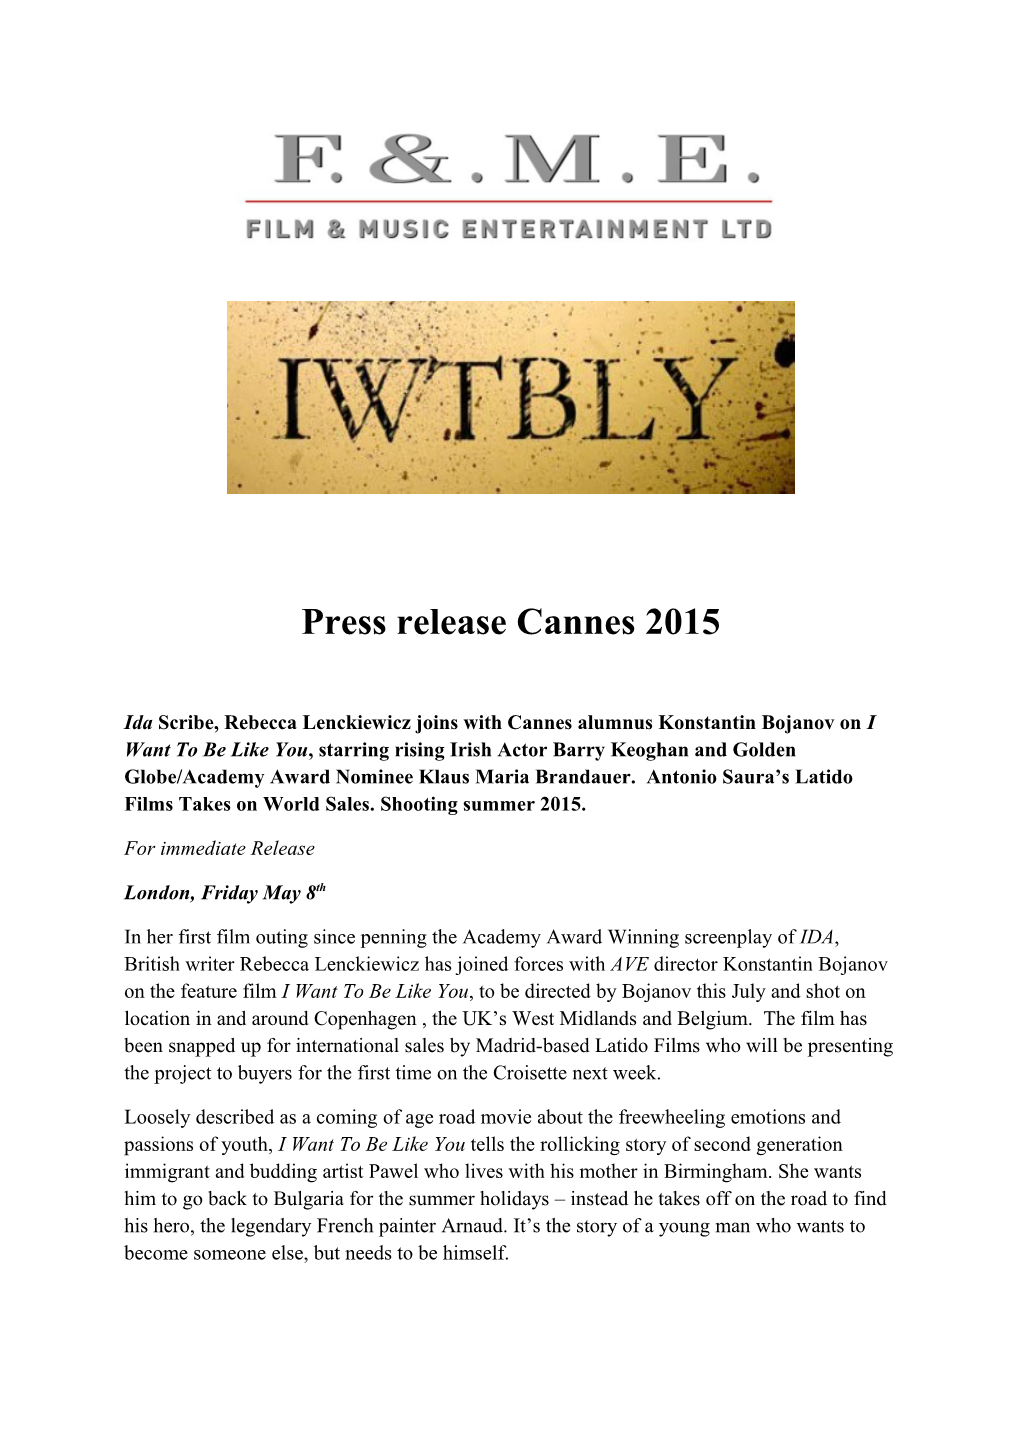 Press Release Cannes 2015